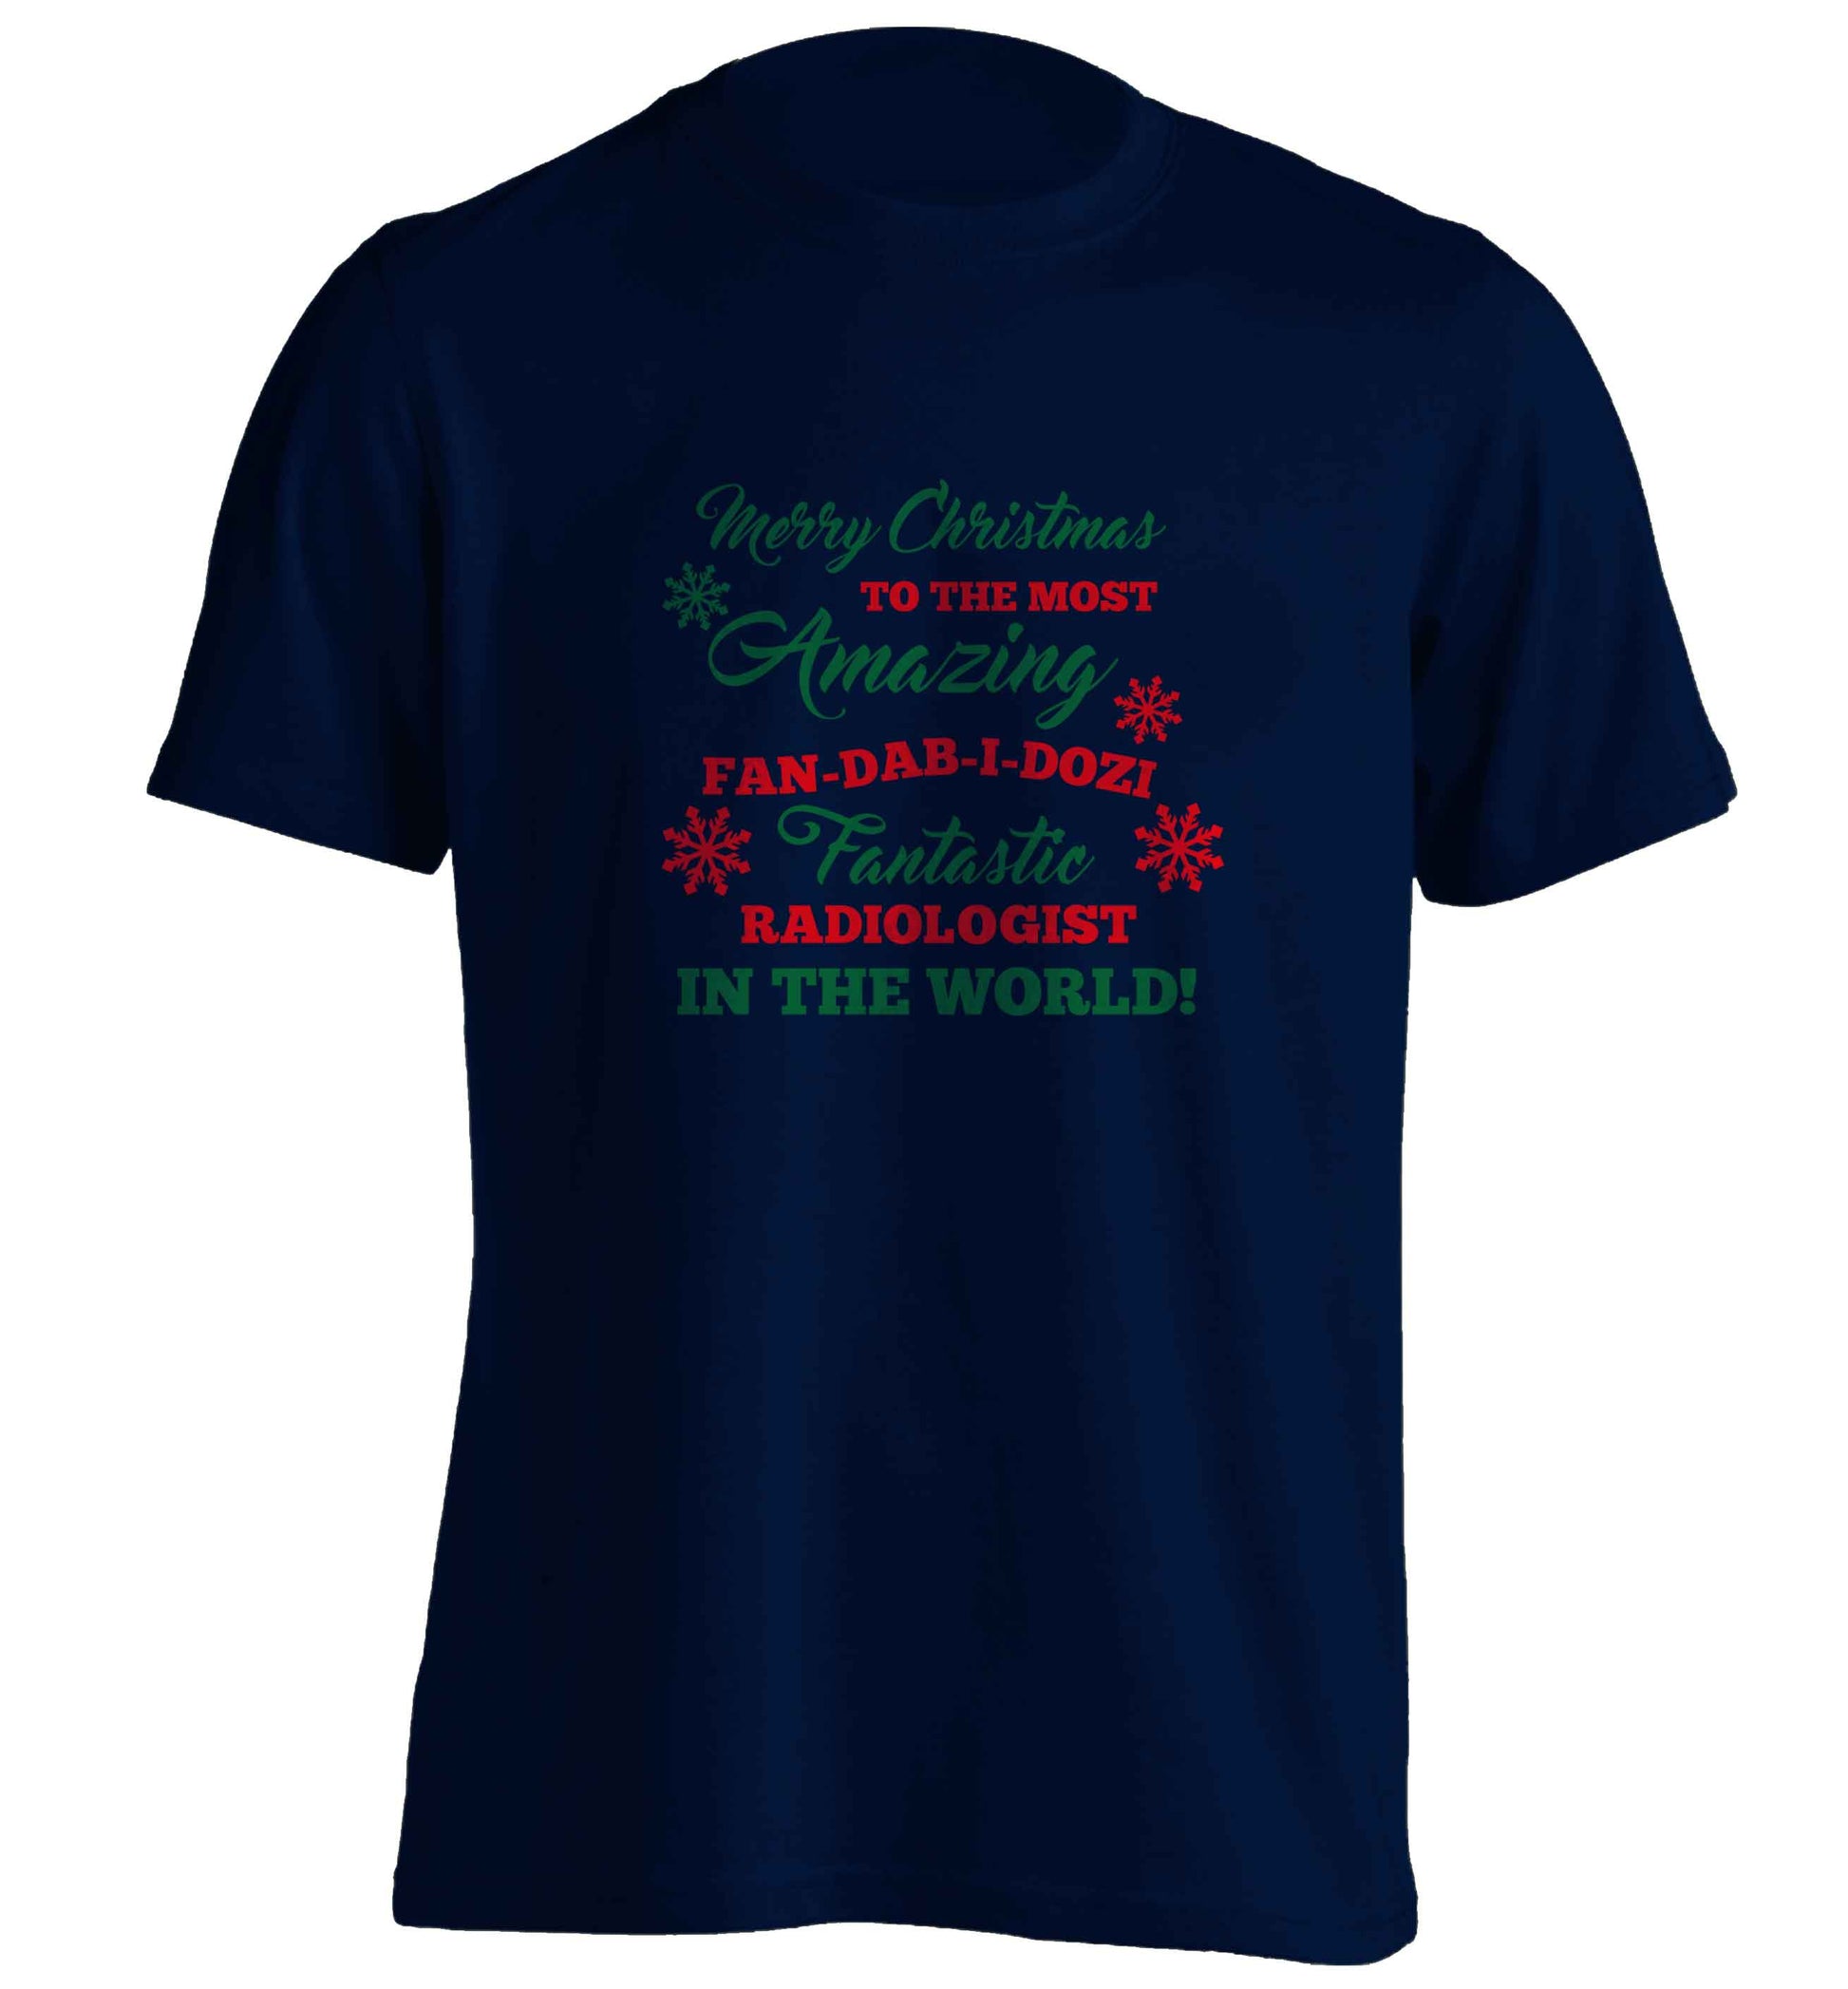 Merry Christmas to the most amazing radiologist in the world! adults unisex navy Tshirt 2XL